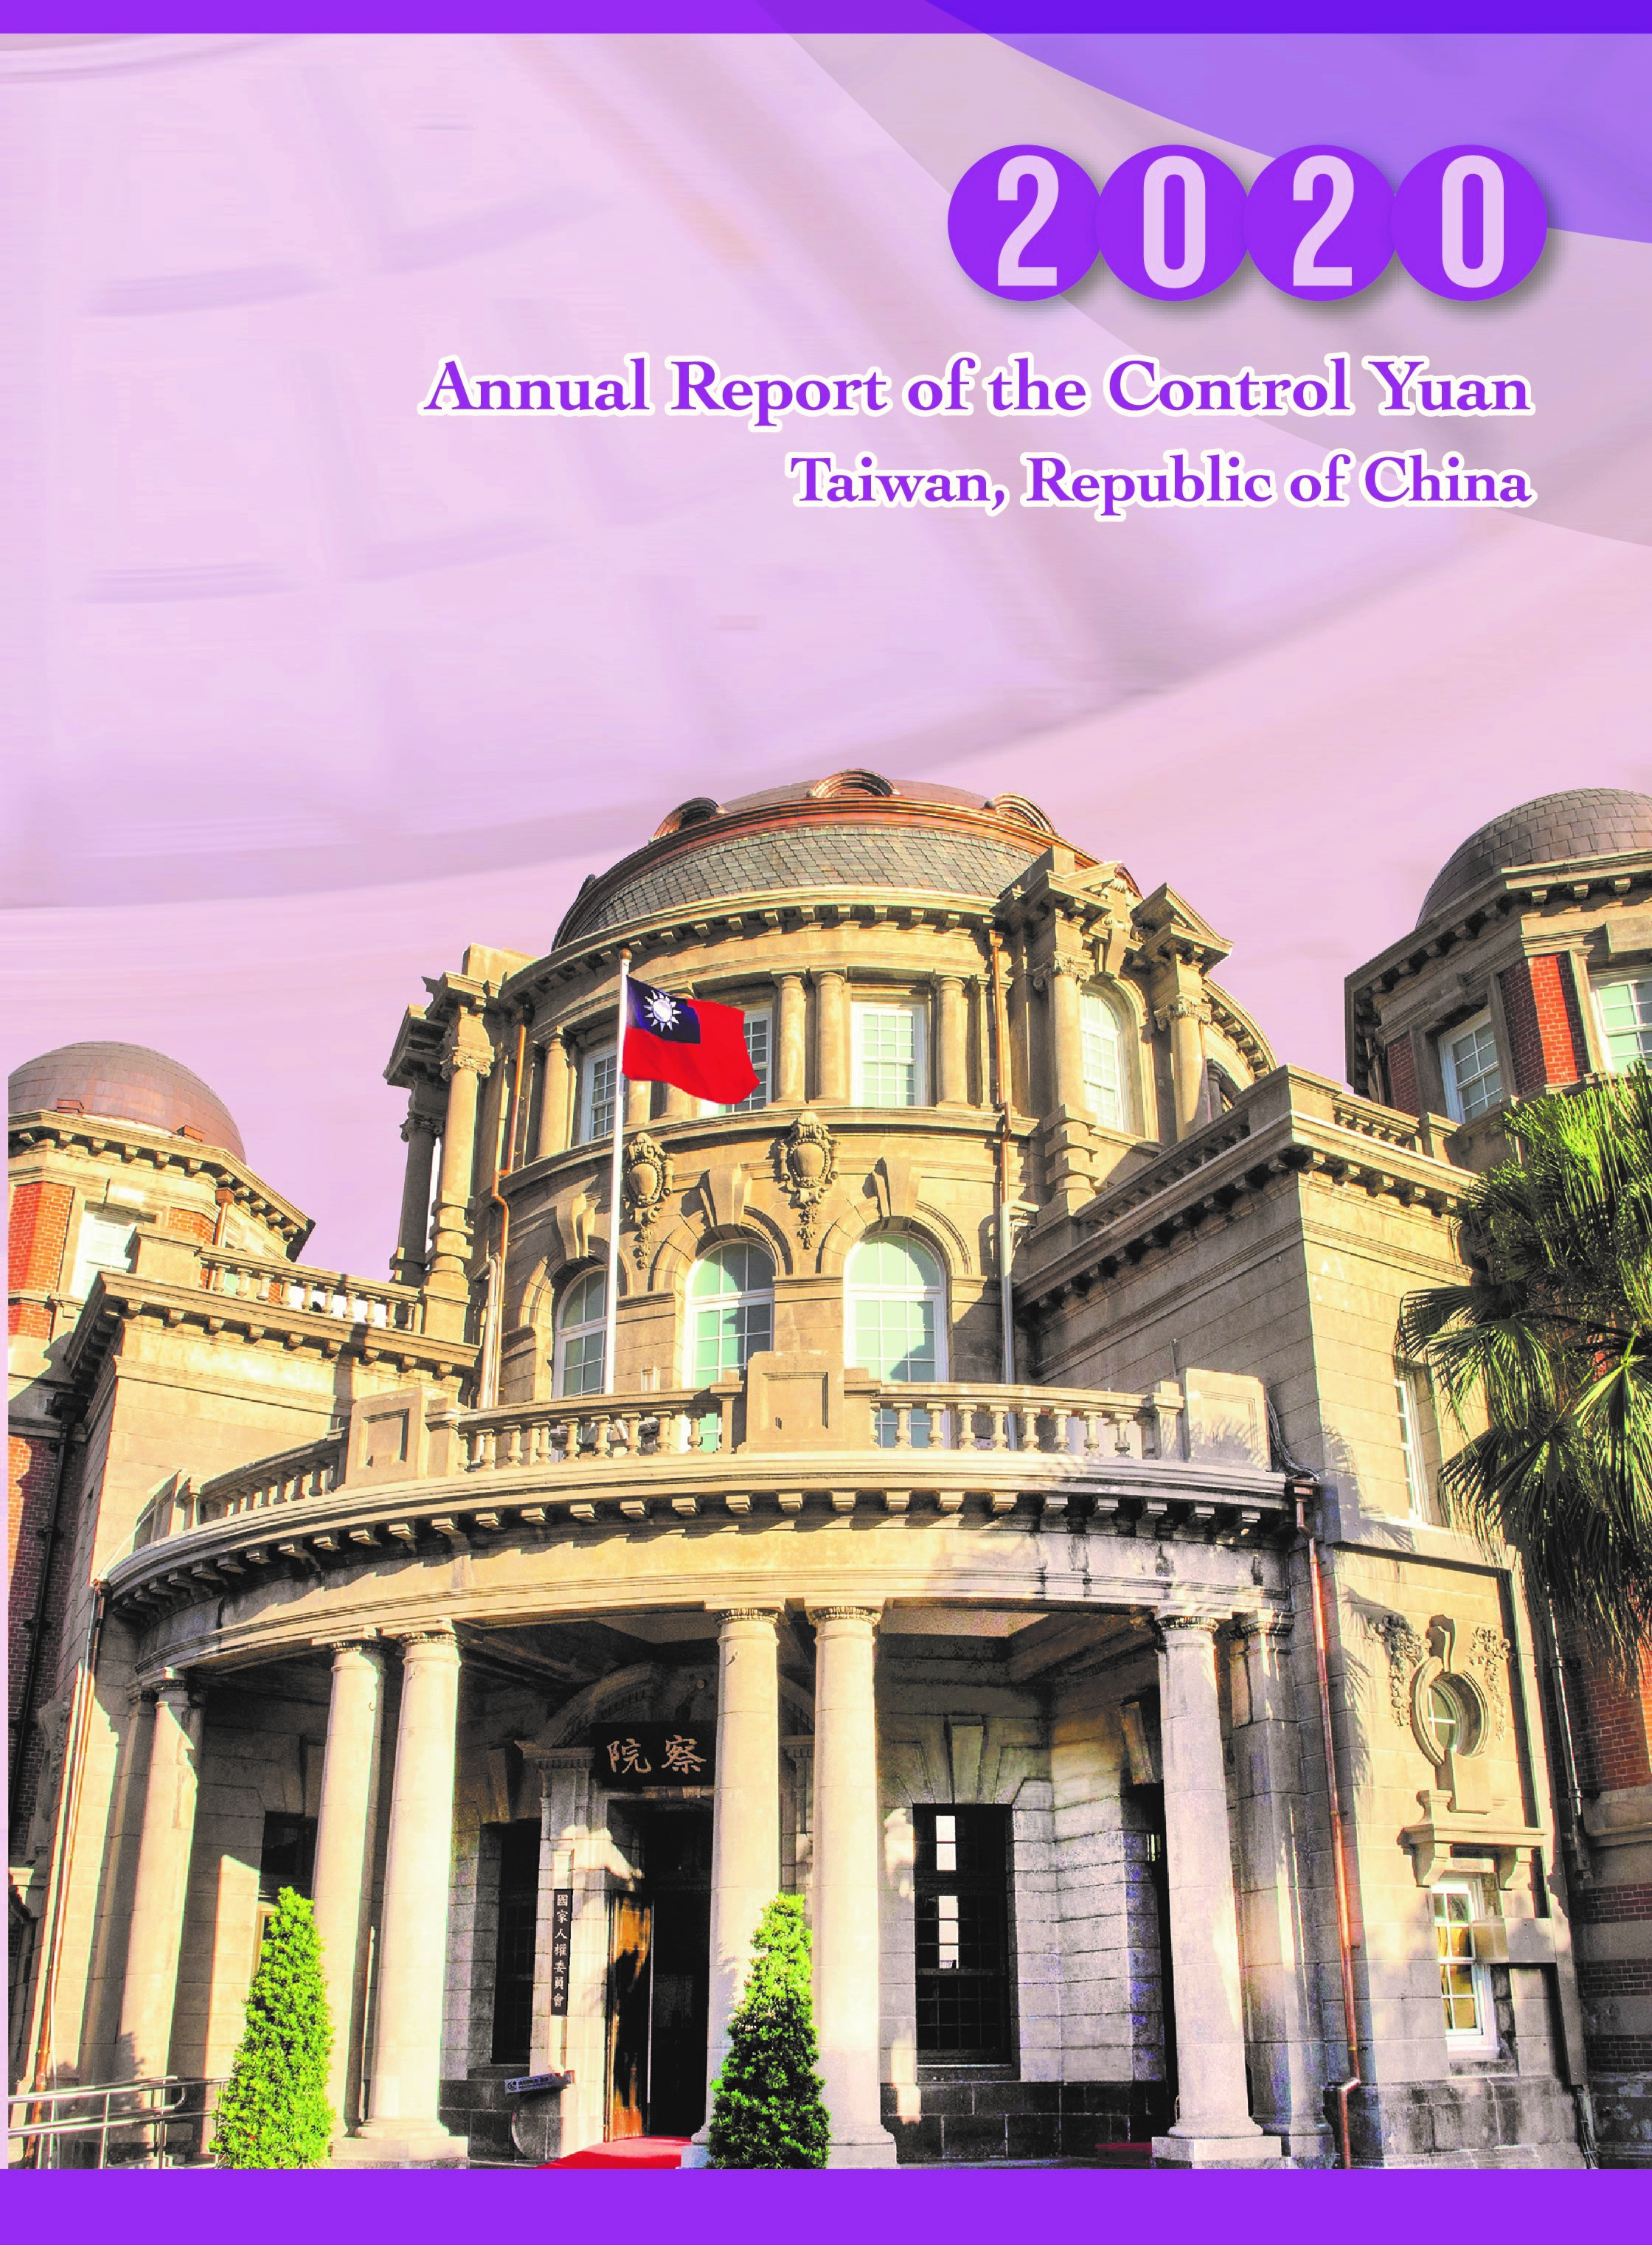 Annual Report of the Control Yuan, 2020